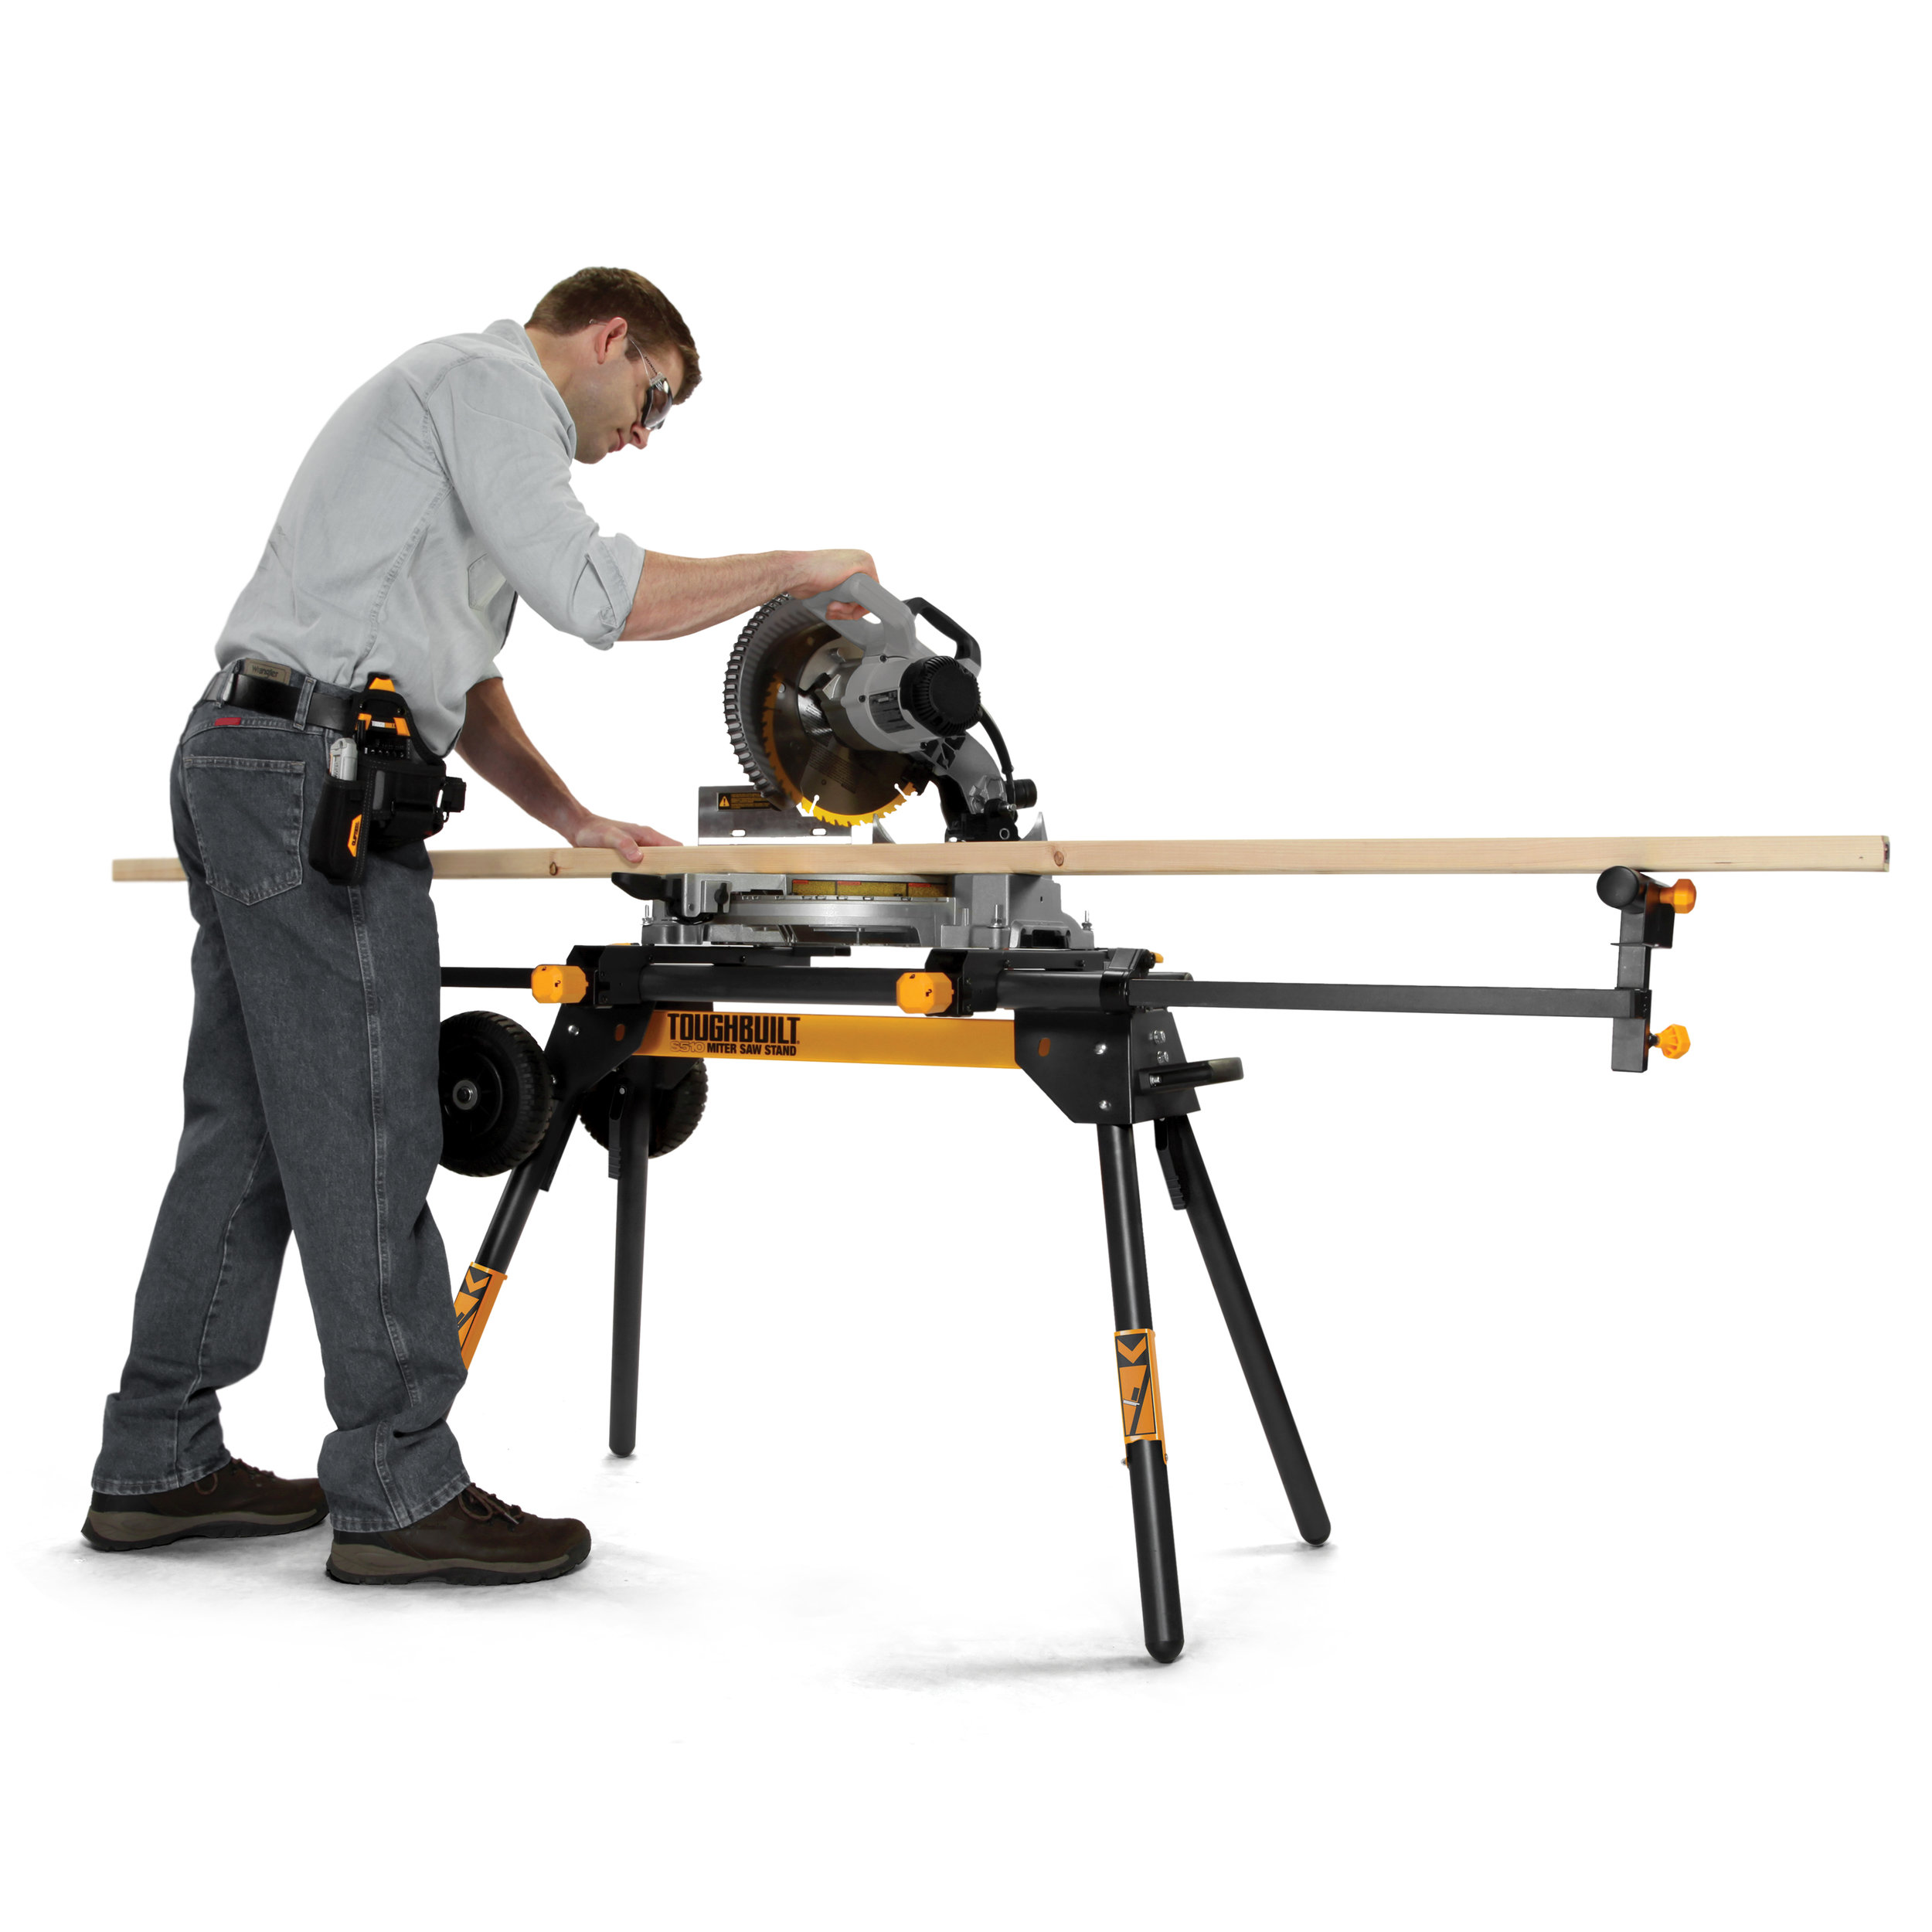 Toughbuilt 77 in Miter Saw Stand Universally Compatible with Most Miter Saws 